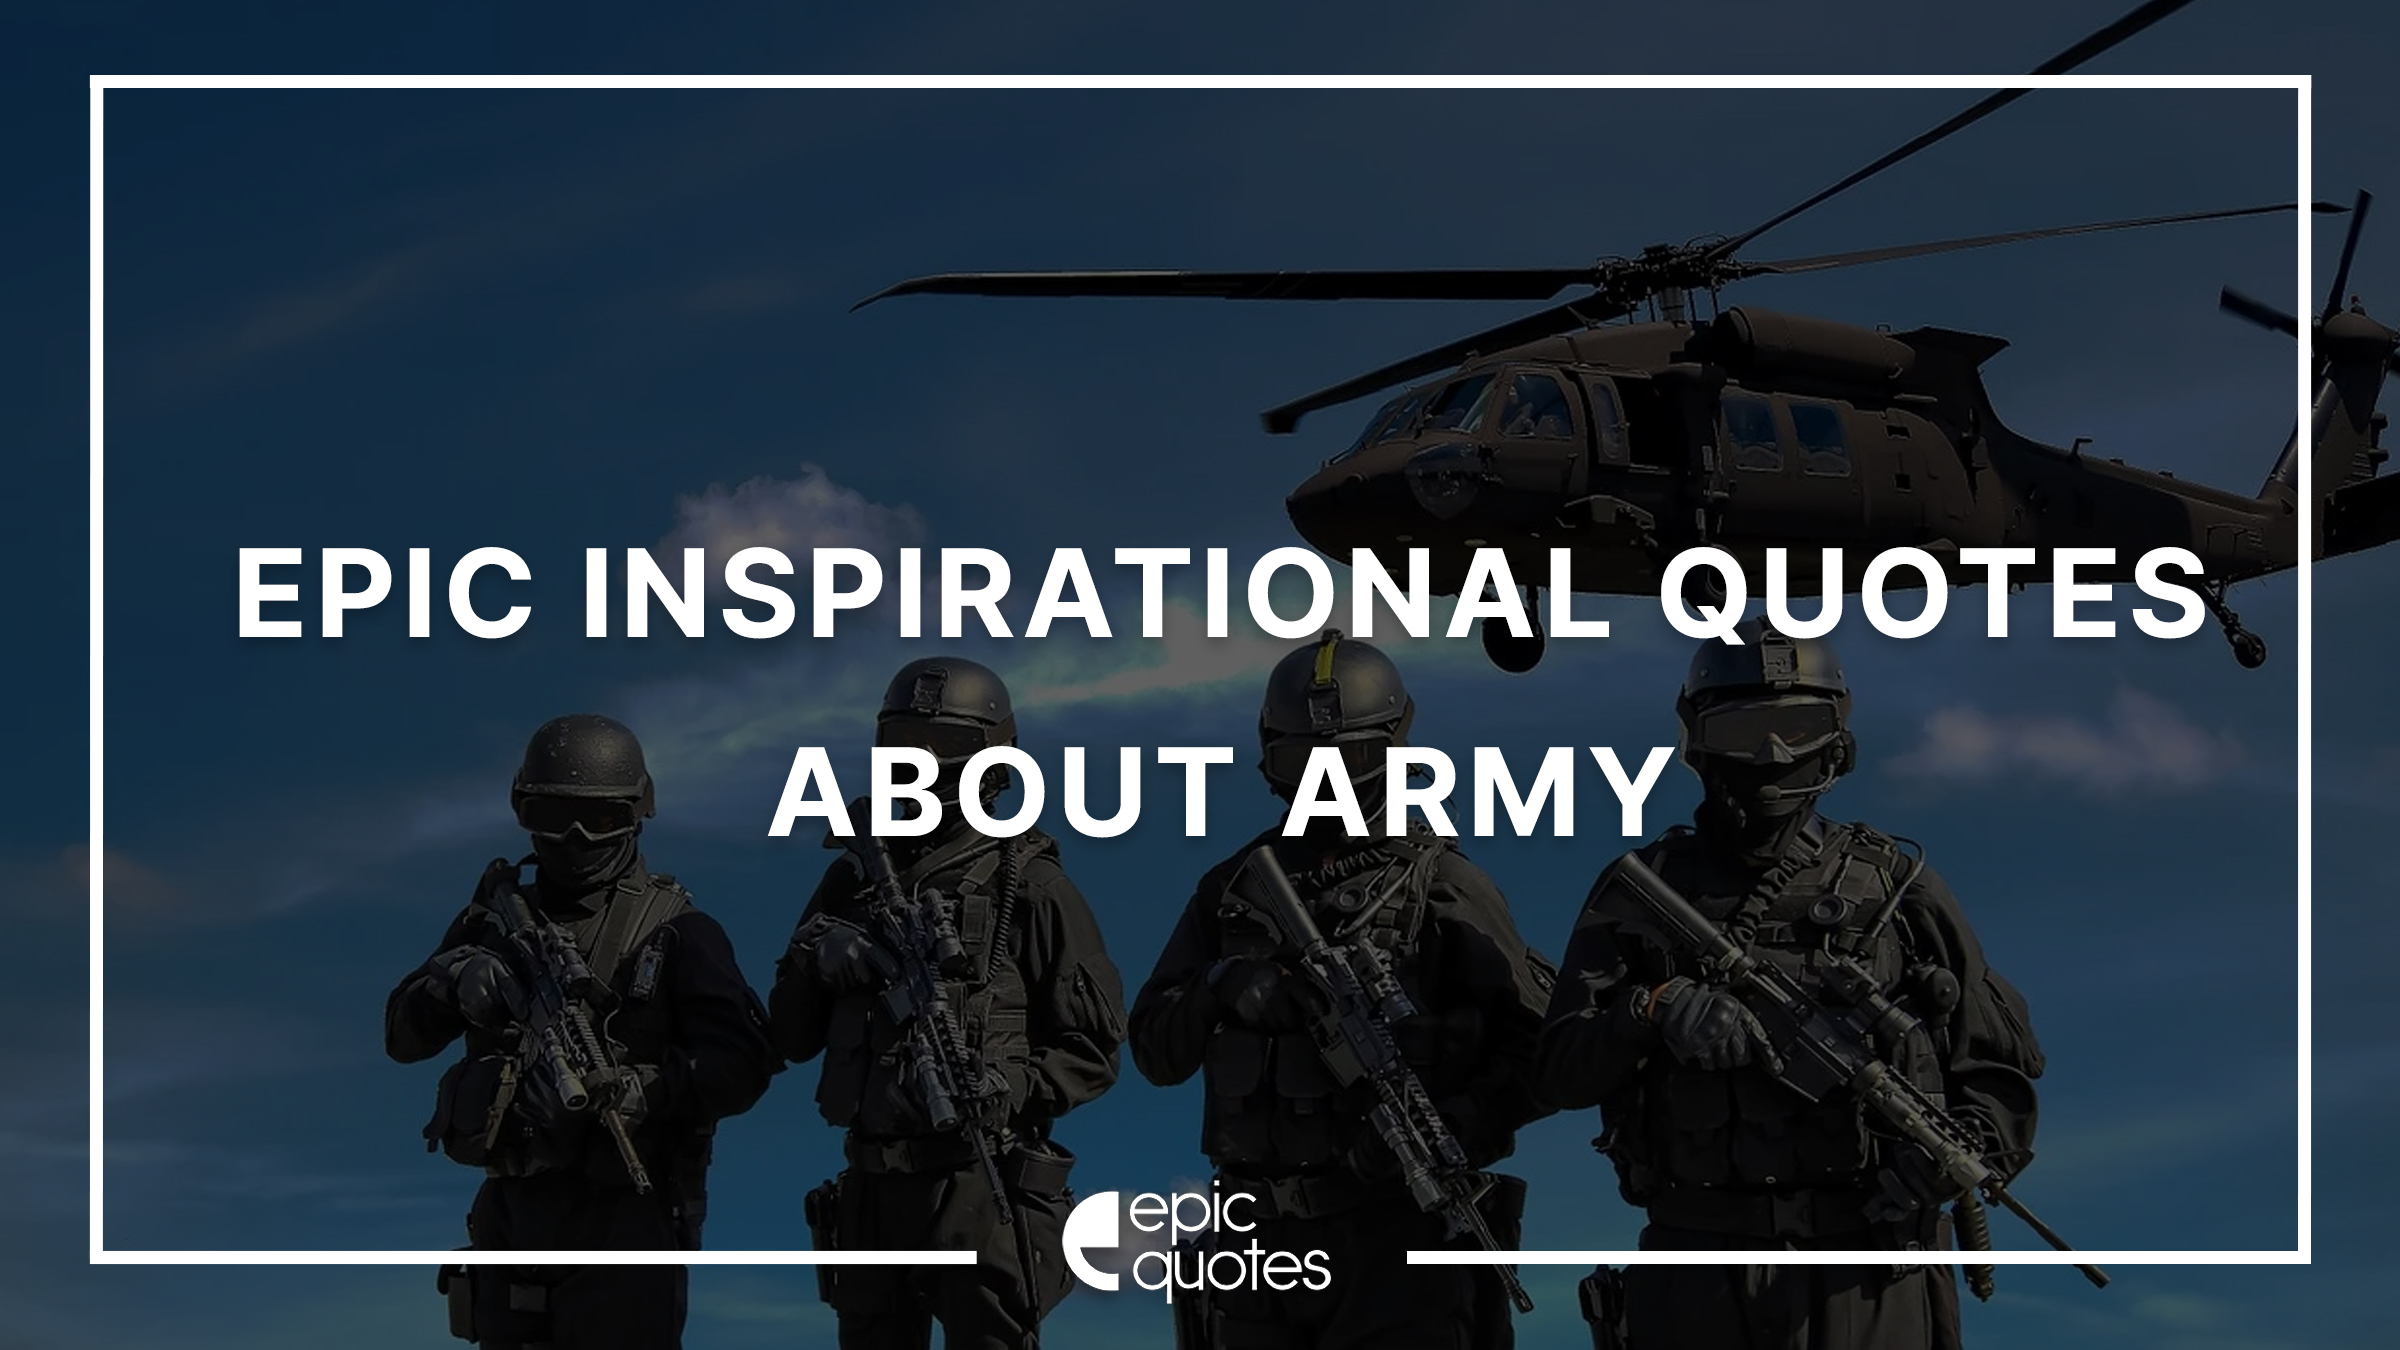 15 Epic Inspirational Quotes About Army - Epic Quotes